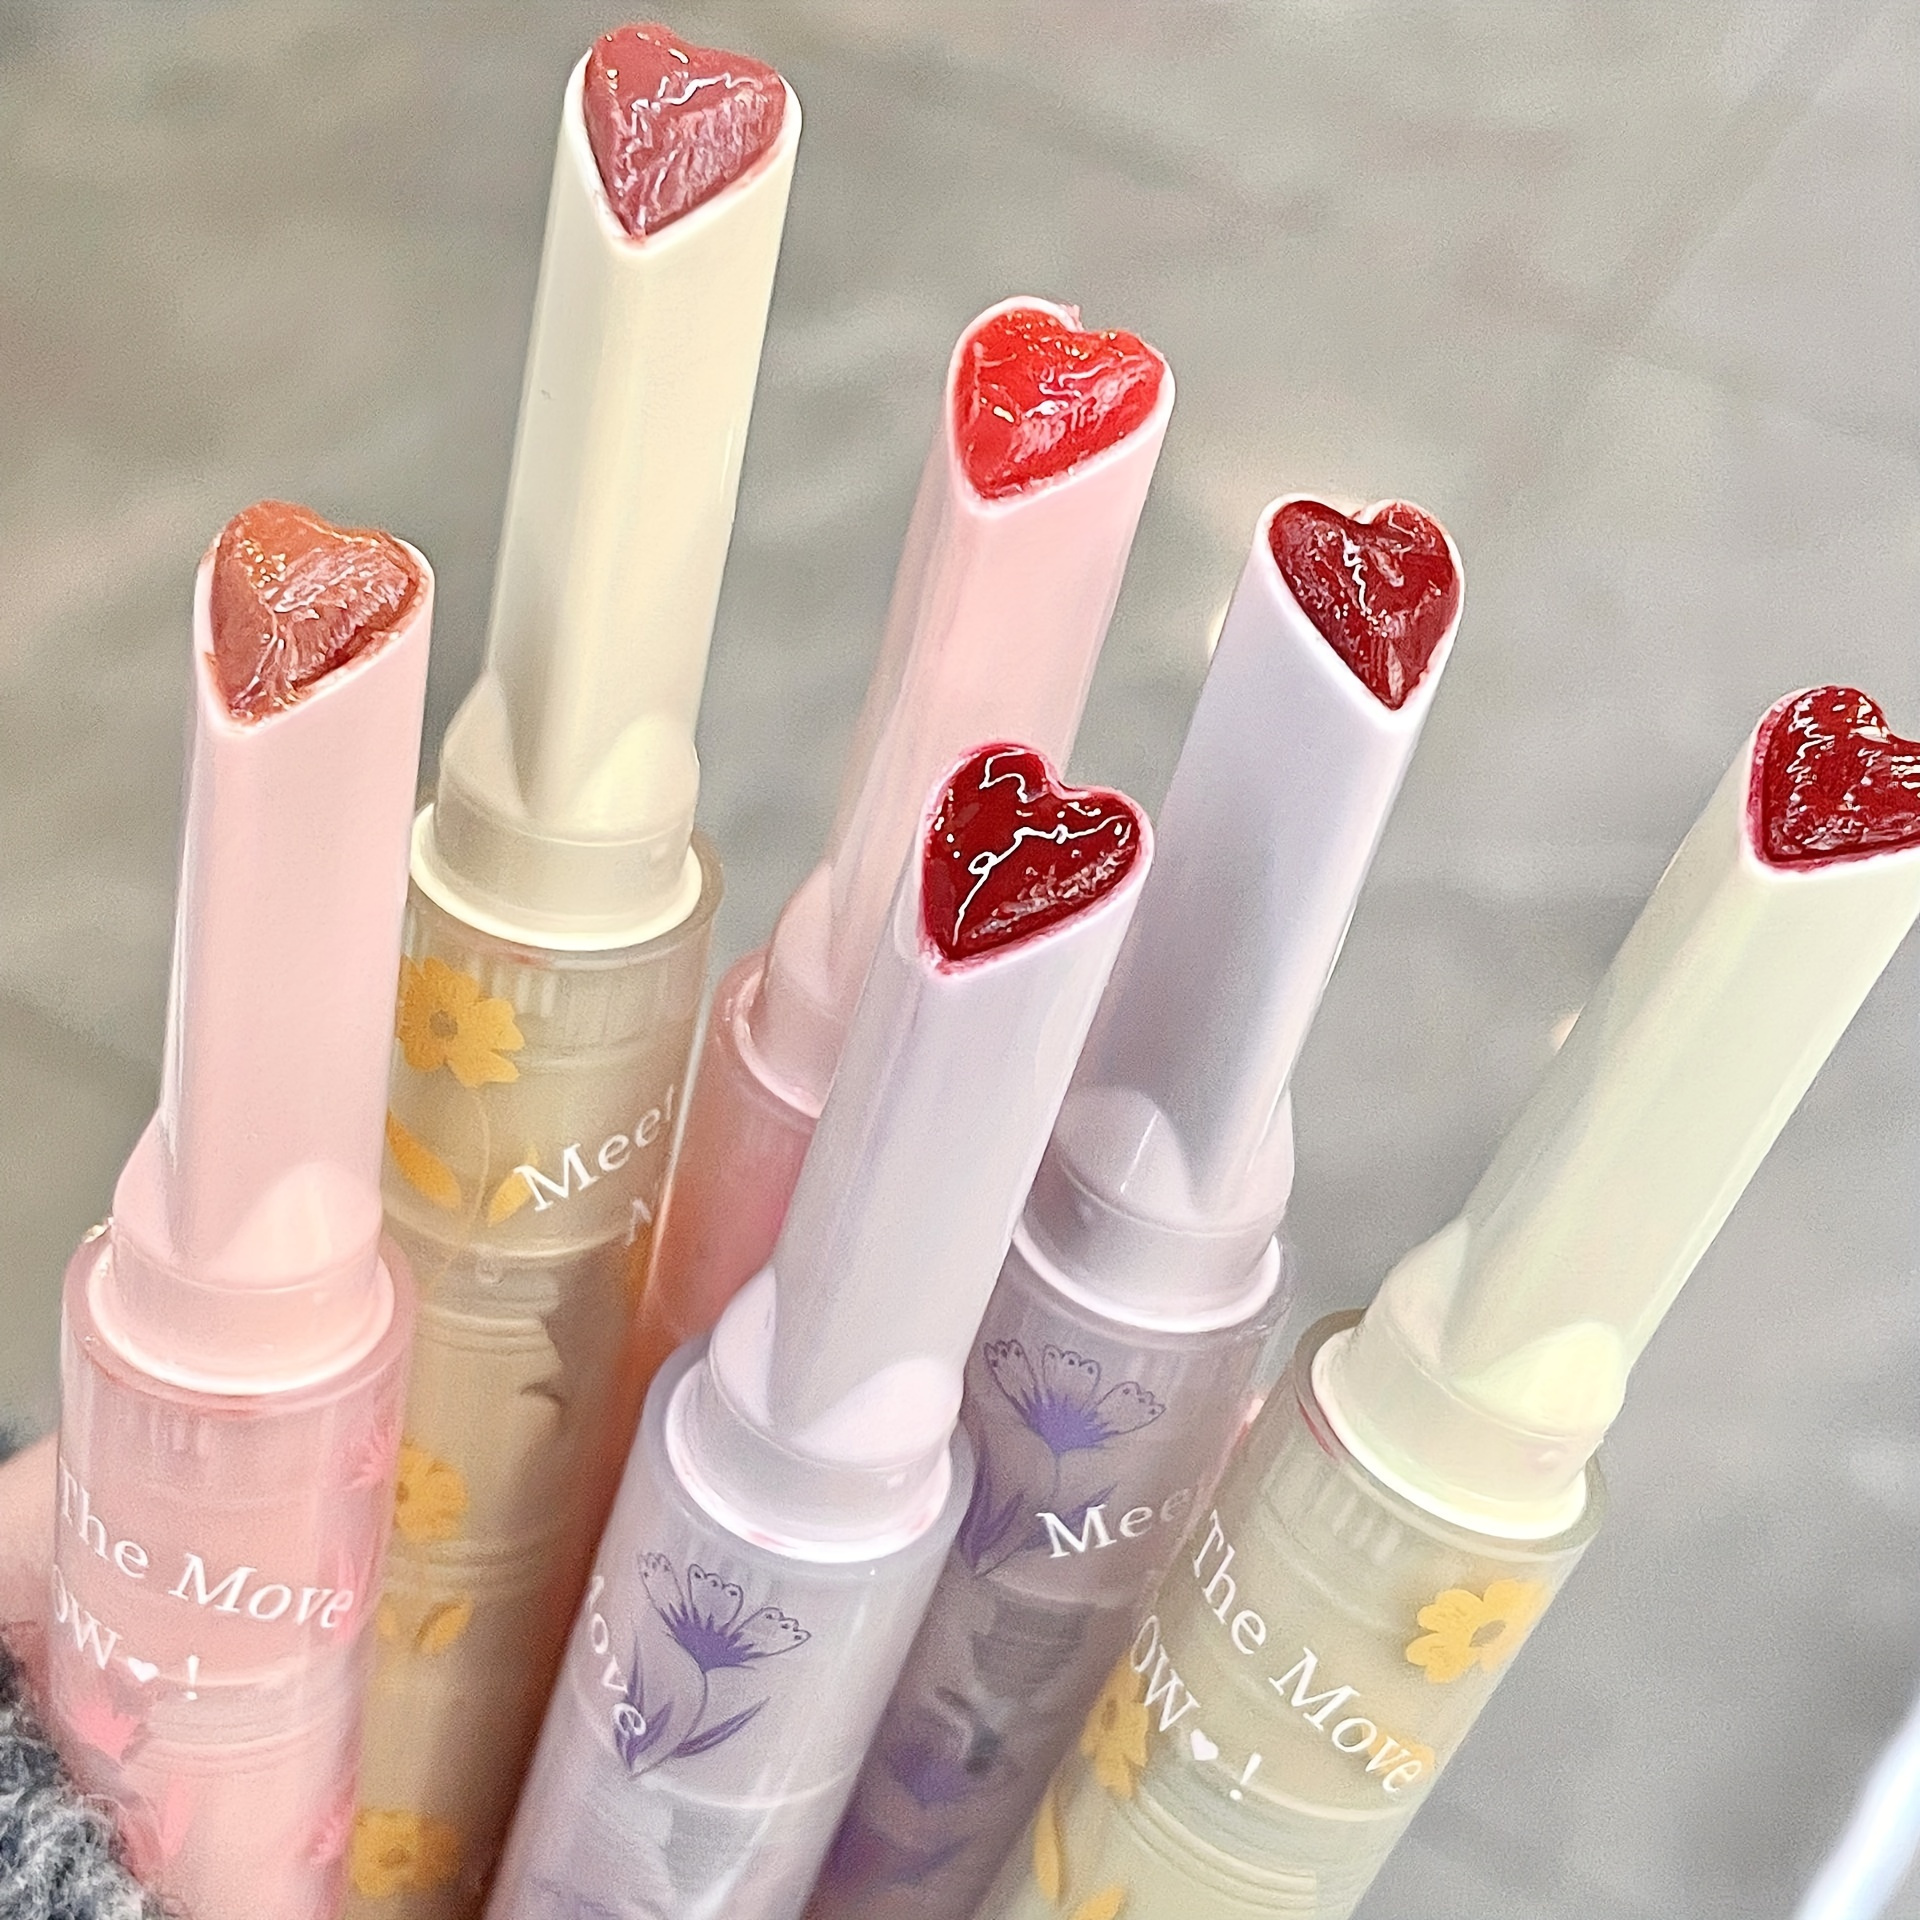 

Honey Lipstick Lip Glaze - Moisturizing, Lustrous, Dewy Jelly Lipstick For Plumping And Smoothing